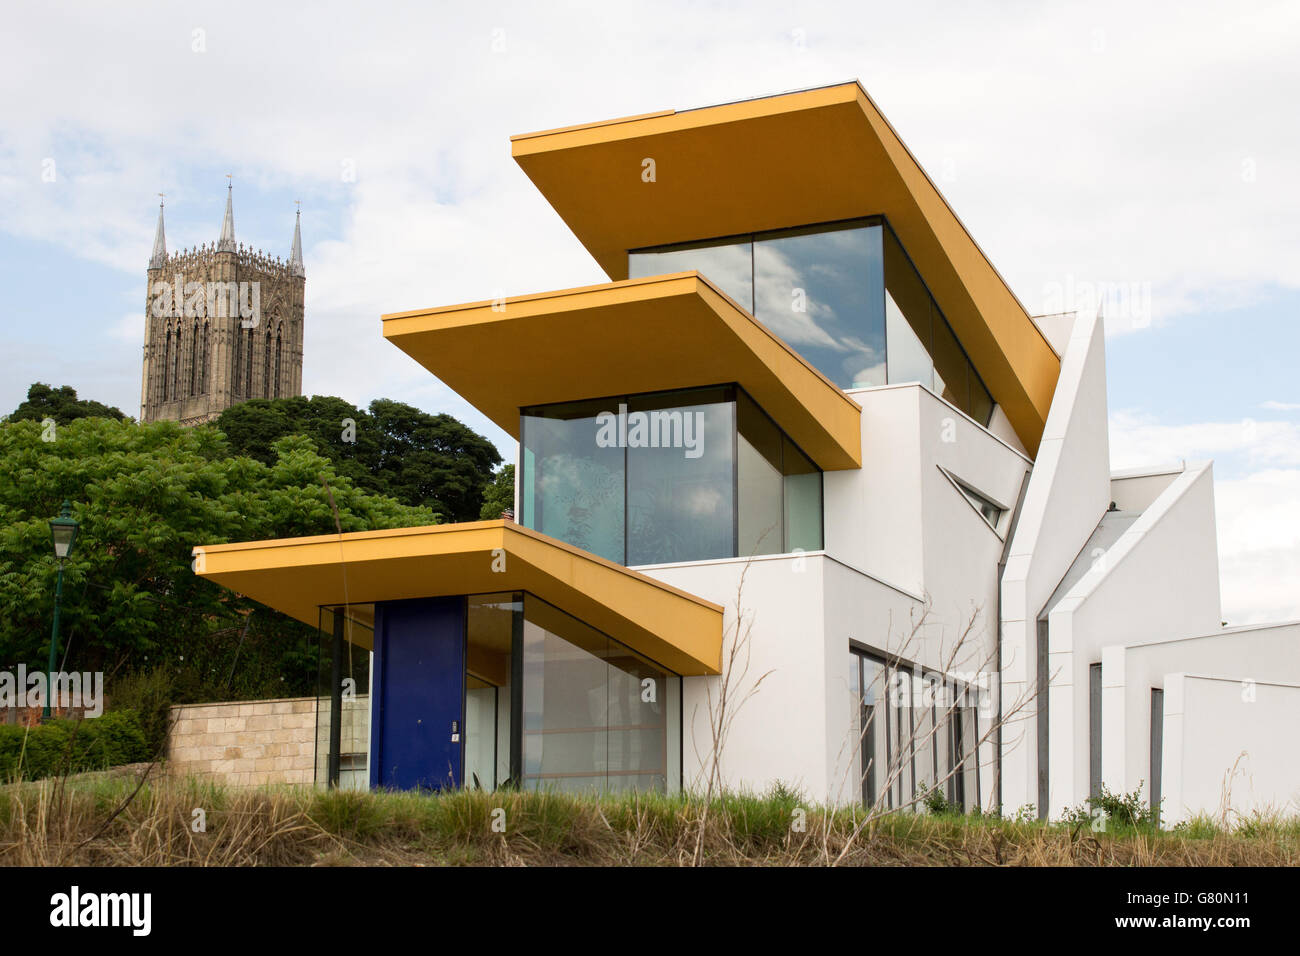 A modern house with striking architecture situated on Michaelgate next to Steep Hill in the upper area of Lincoln. Stock Photo